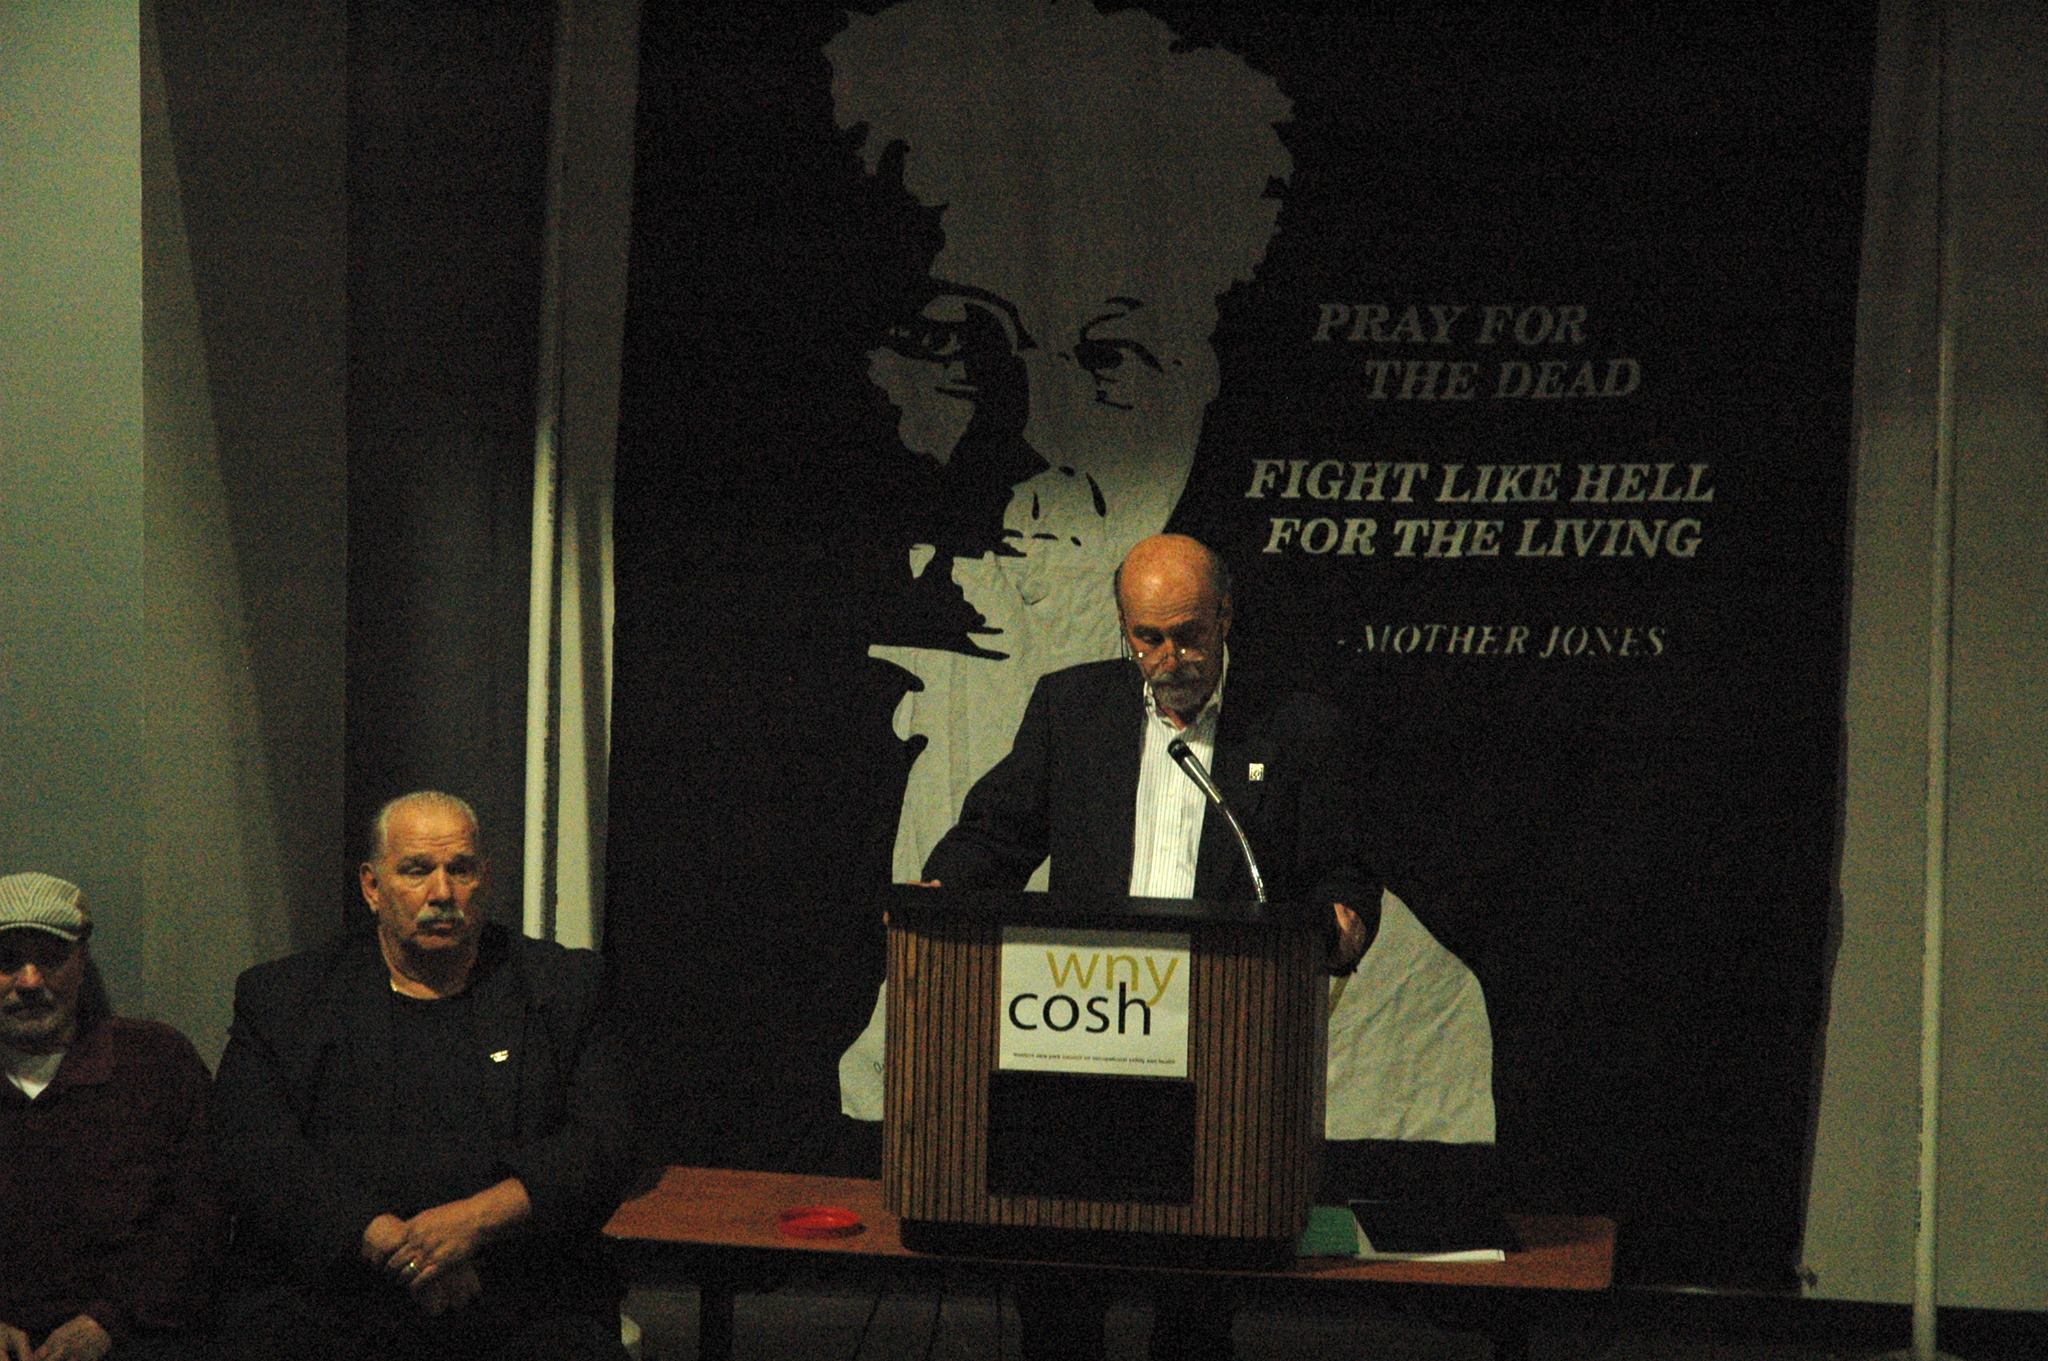 Picture of a man giving a speech in front of a WNYCOSH banner with Mother Jones on it